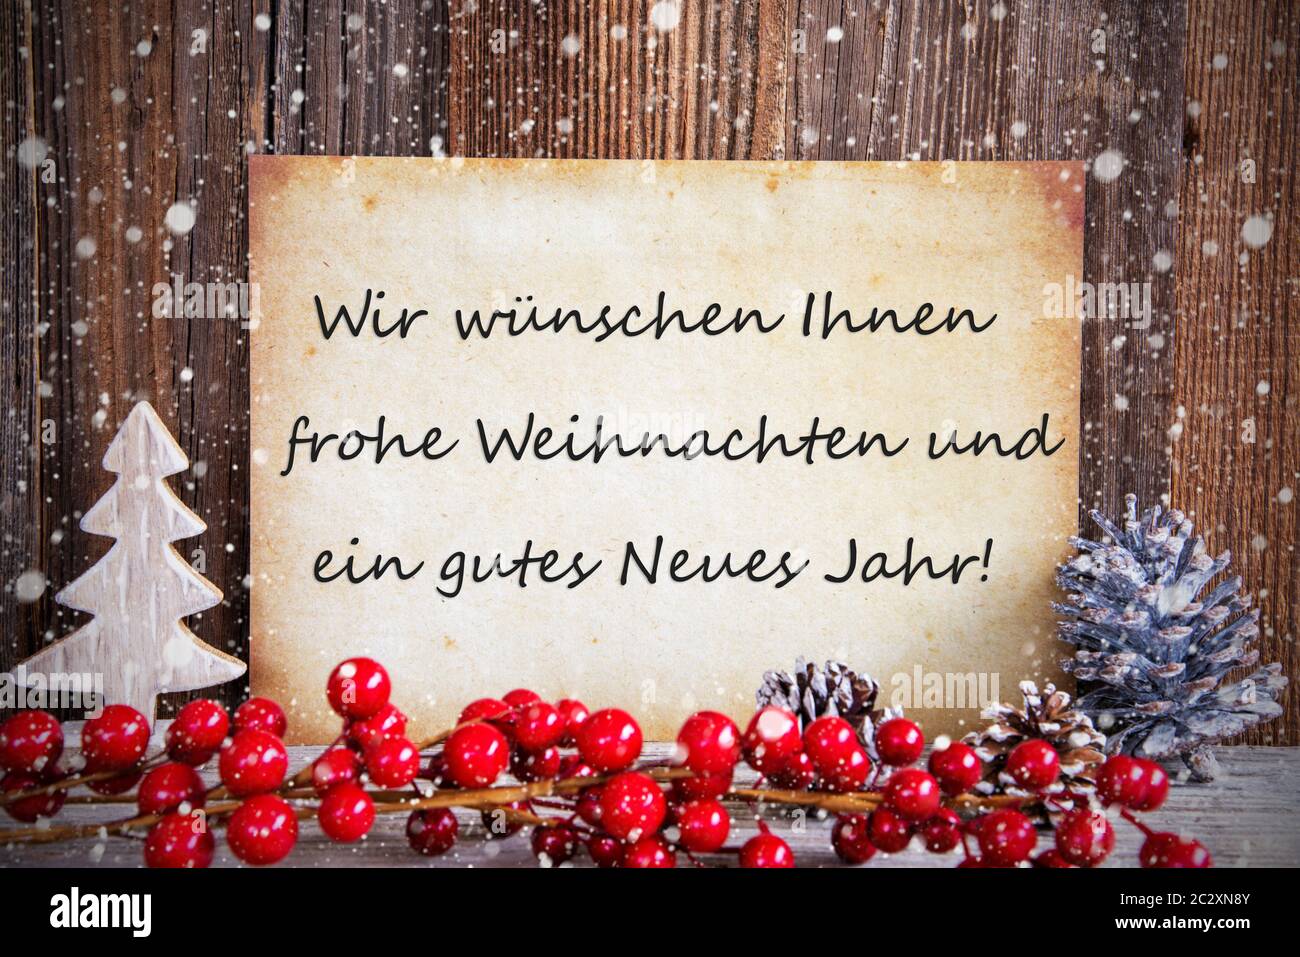 Paper With German Text Frohe Weihnachten Means Und Ein Gutes Neues Jahr Merry Christmas And A Happy New Year. Christmas Decoration And Wooden Backgrou Stock Photo